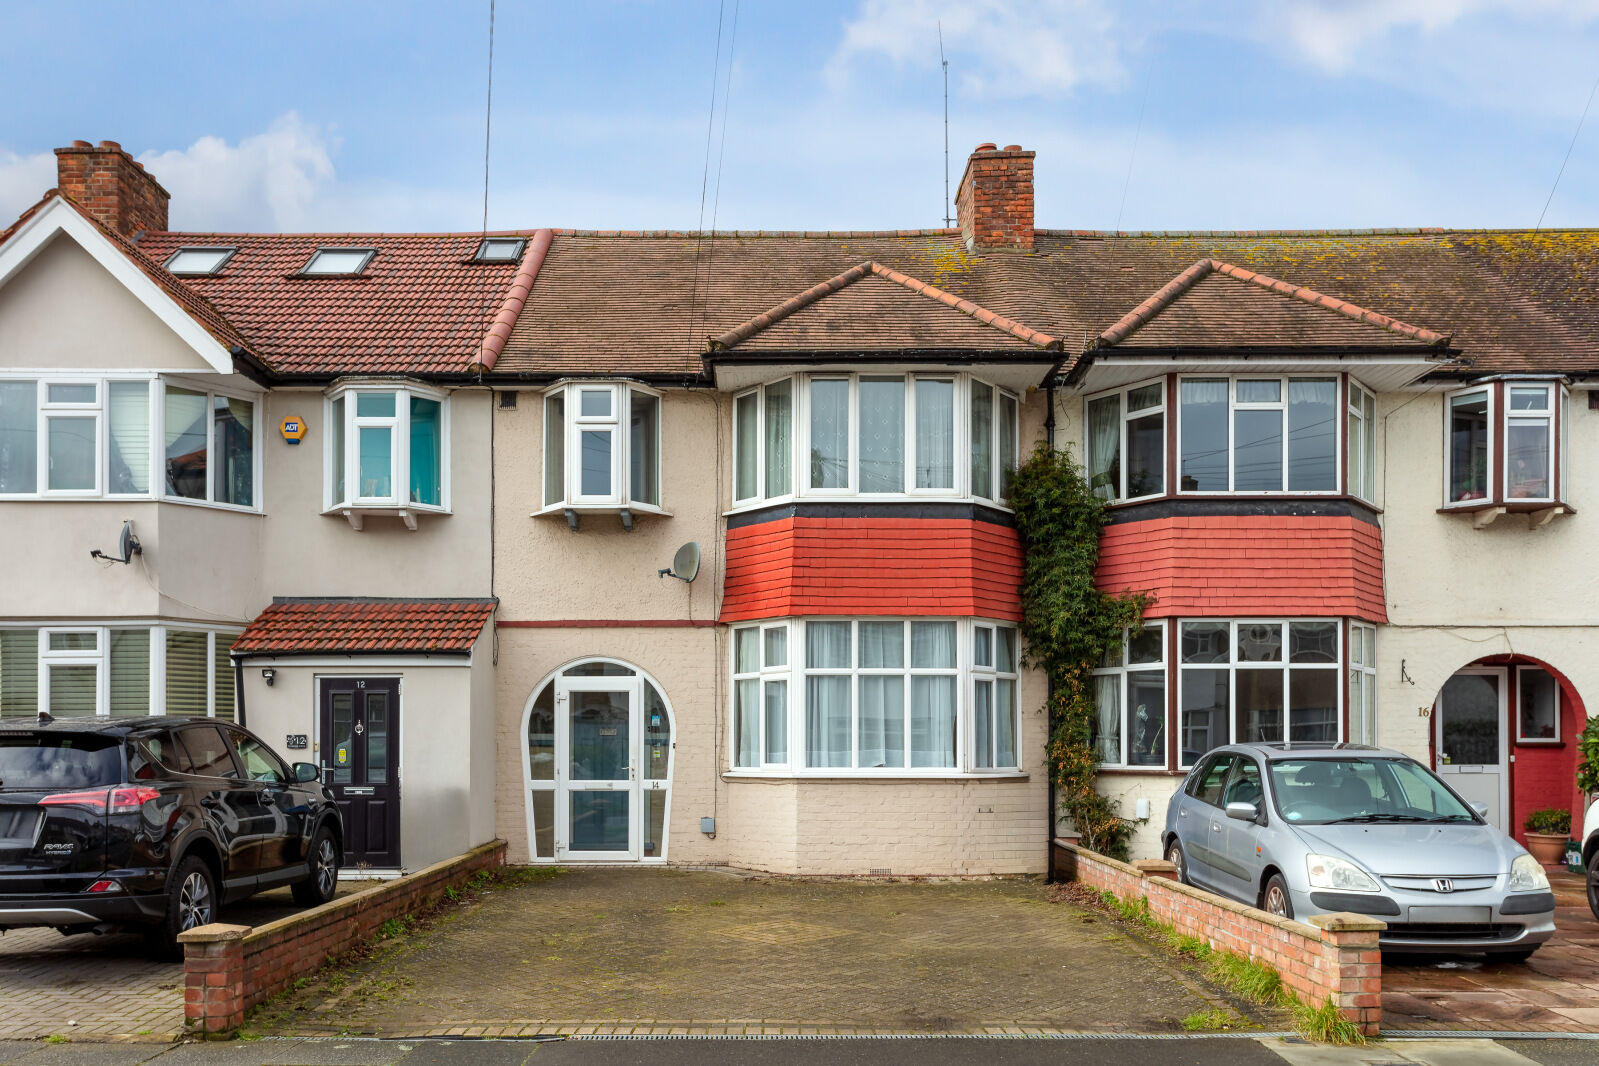 3 bedroom mid terraced house for sale Windermere Avenue, London, SW19, main image